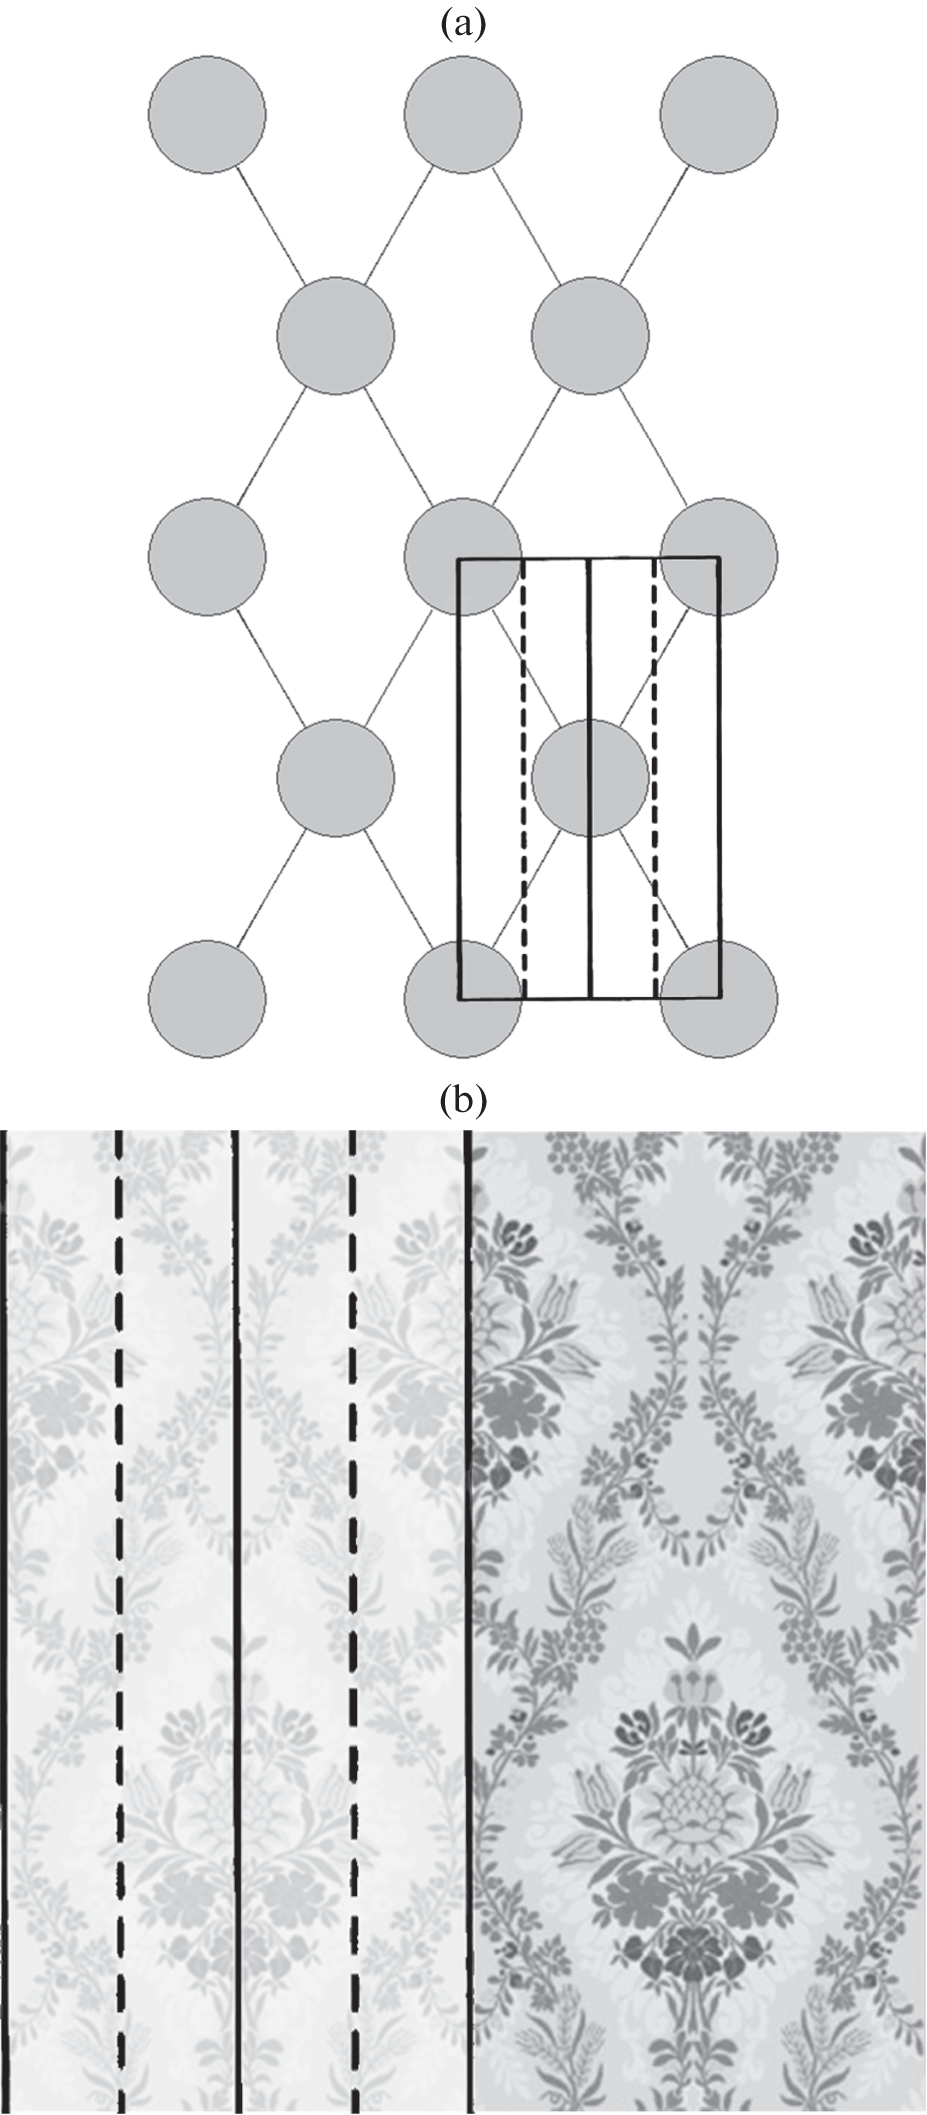 Lattice Tilings of a Plane into Polyominoes and Molecular Layers in Crystal Structures: Structural Class cm, Z = 2(m)